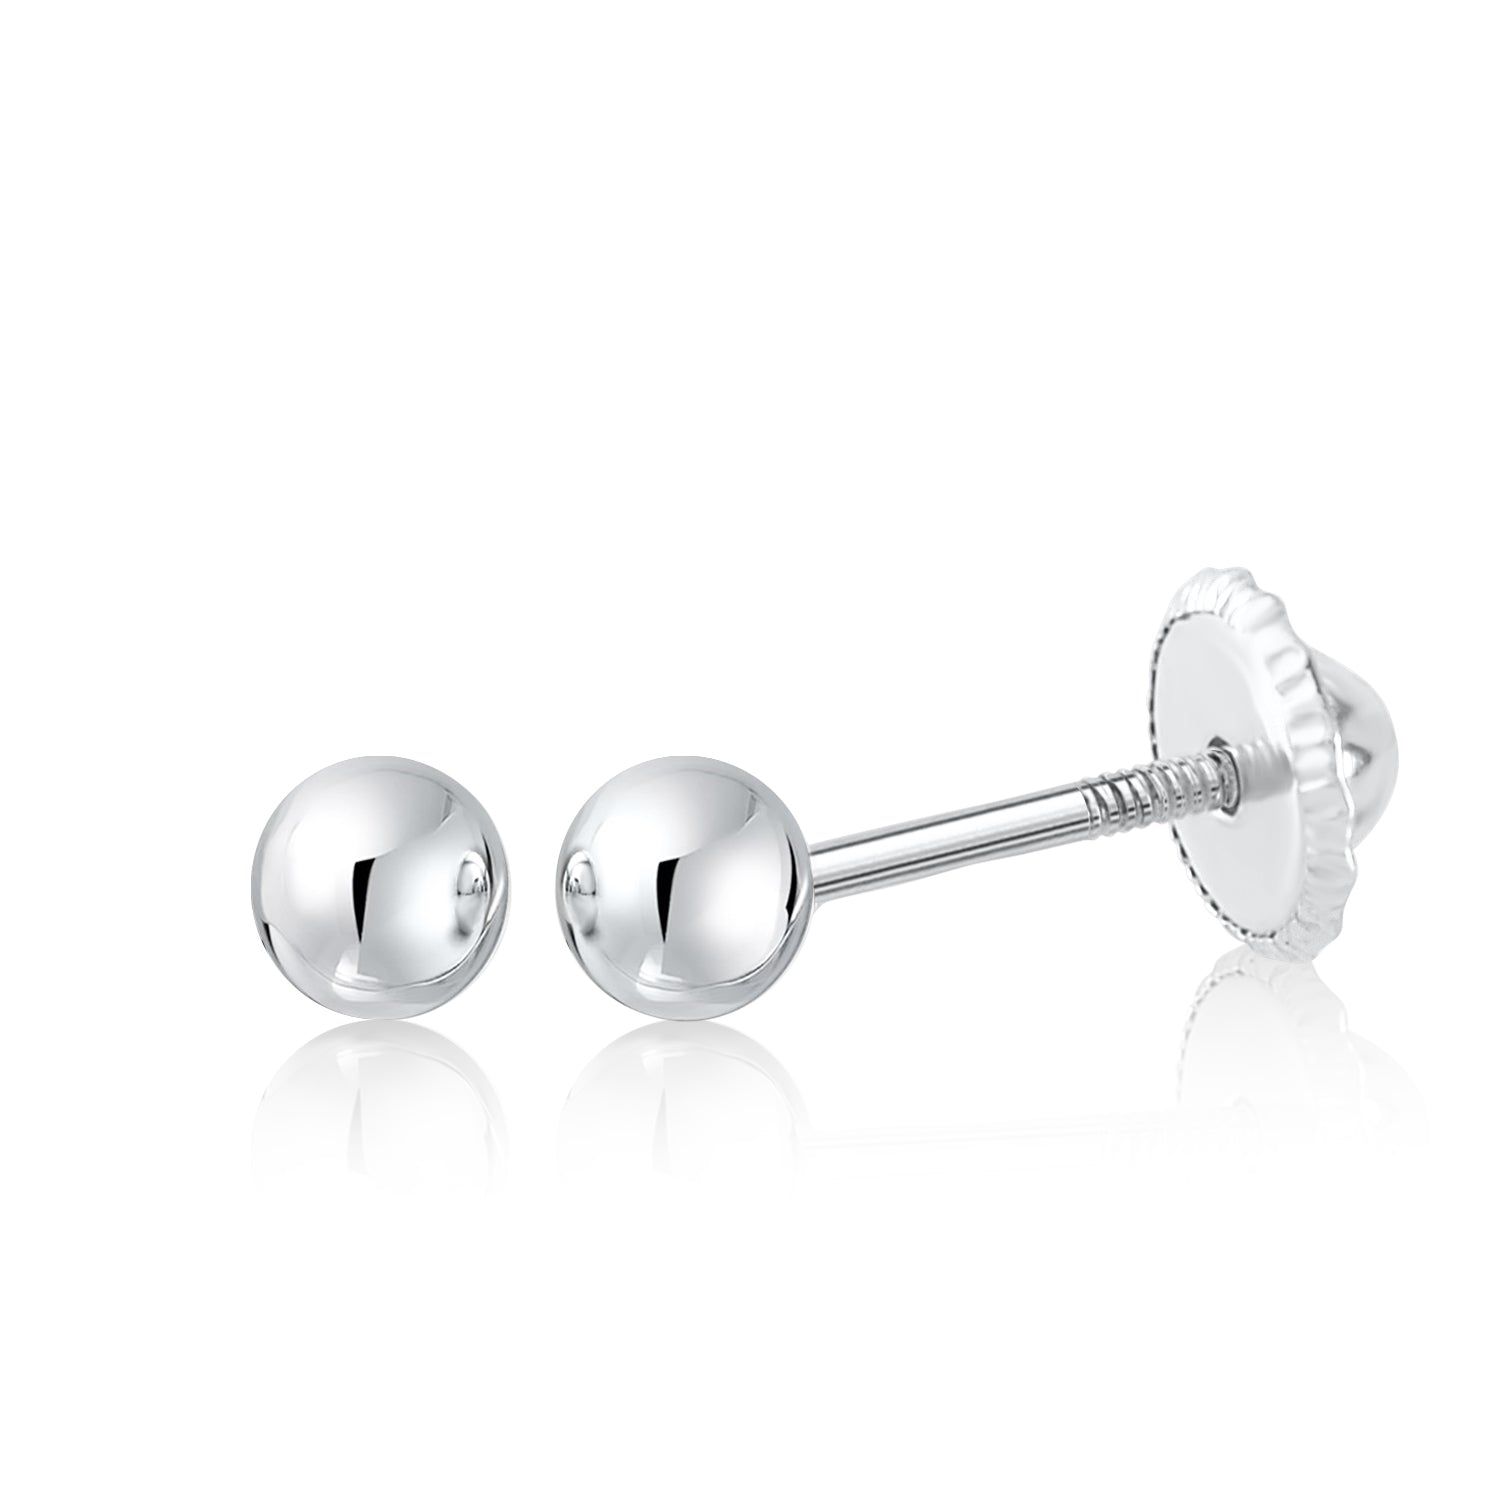 14k Solid Gold Ball Earrings with Flat Covered Back Screwback Shiny Sphere Earring Studs 3mm 4mm 5mm